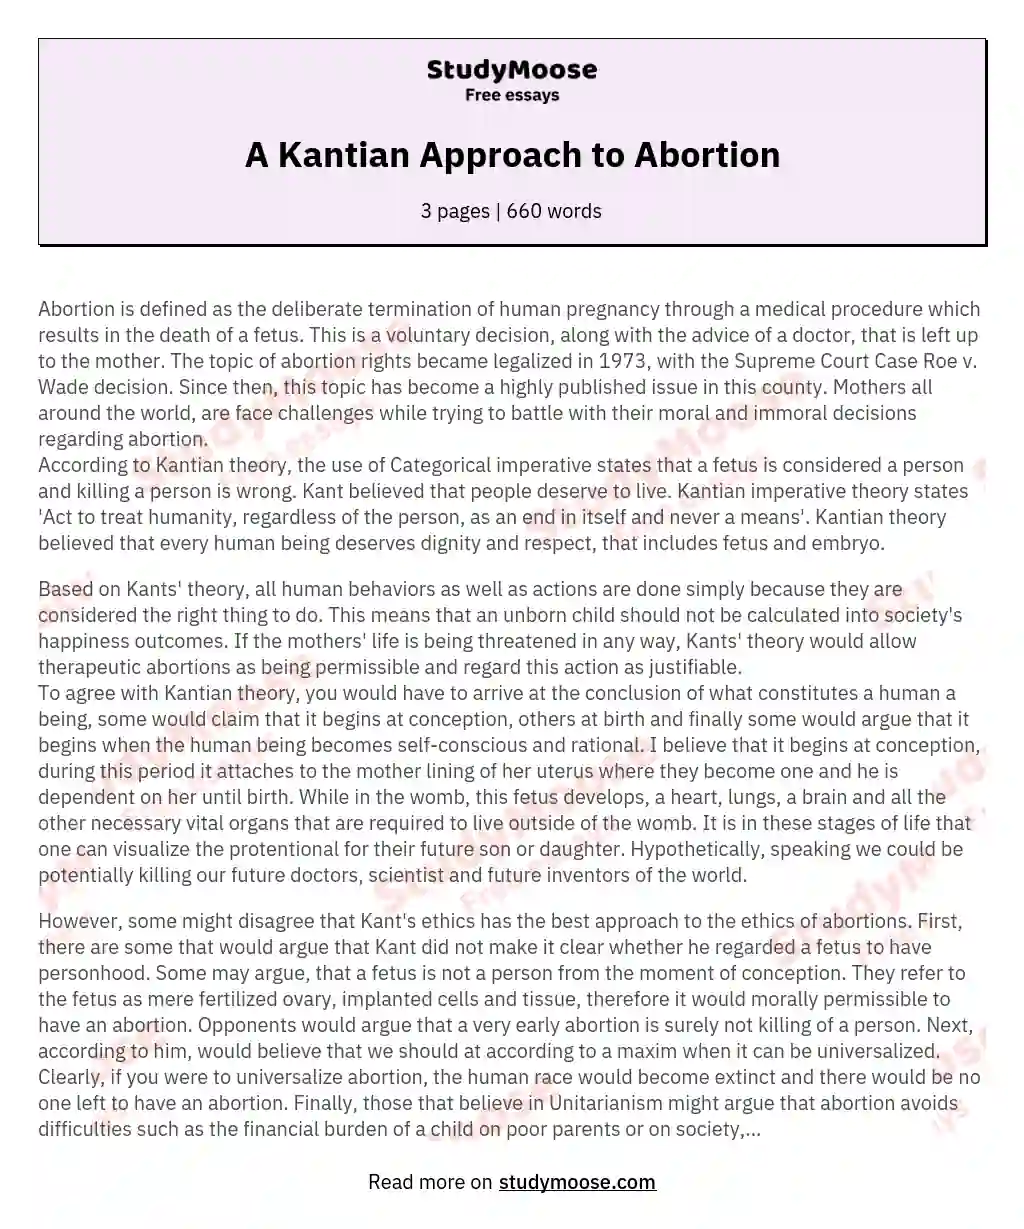 A Kantian Approach to Abortion